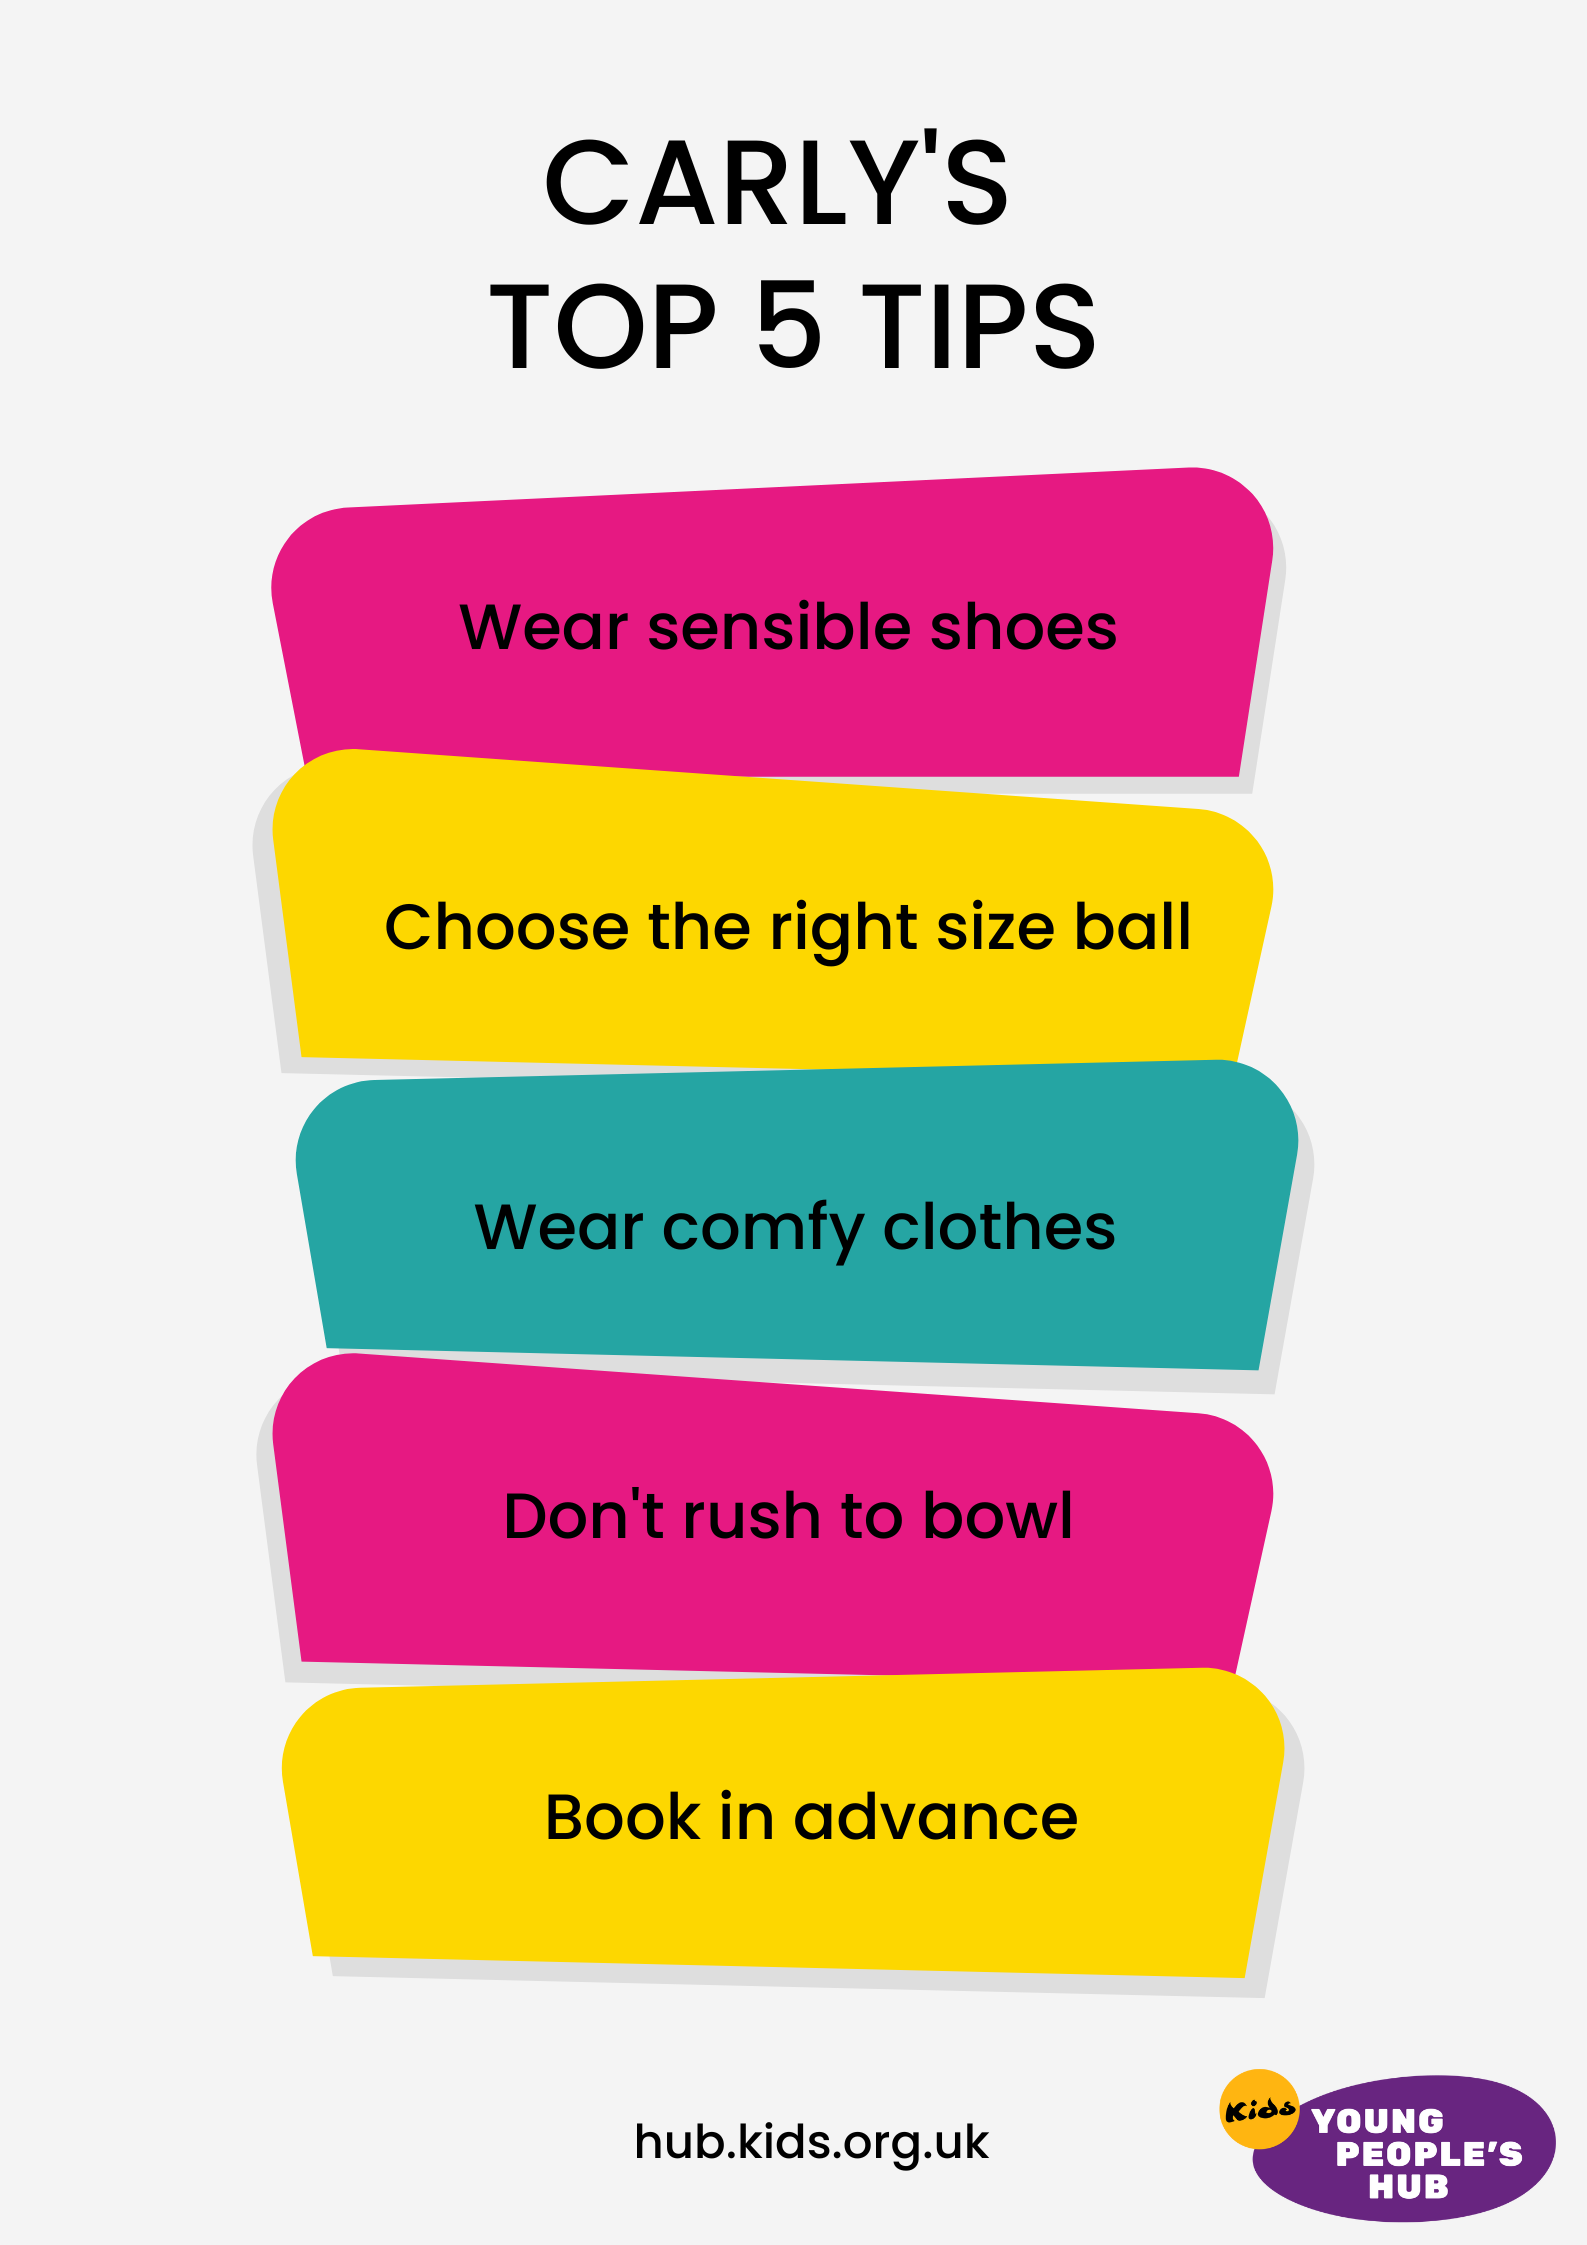 Top 5 tips for bowling